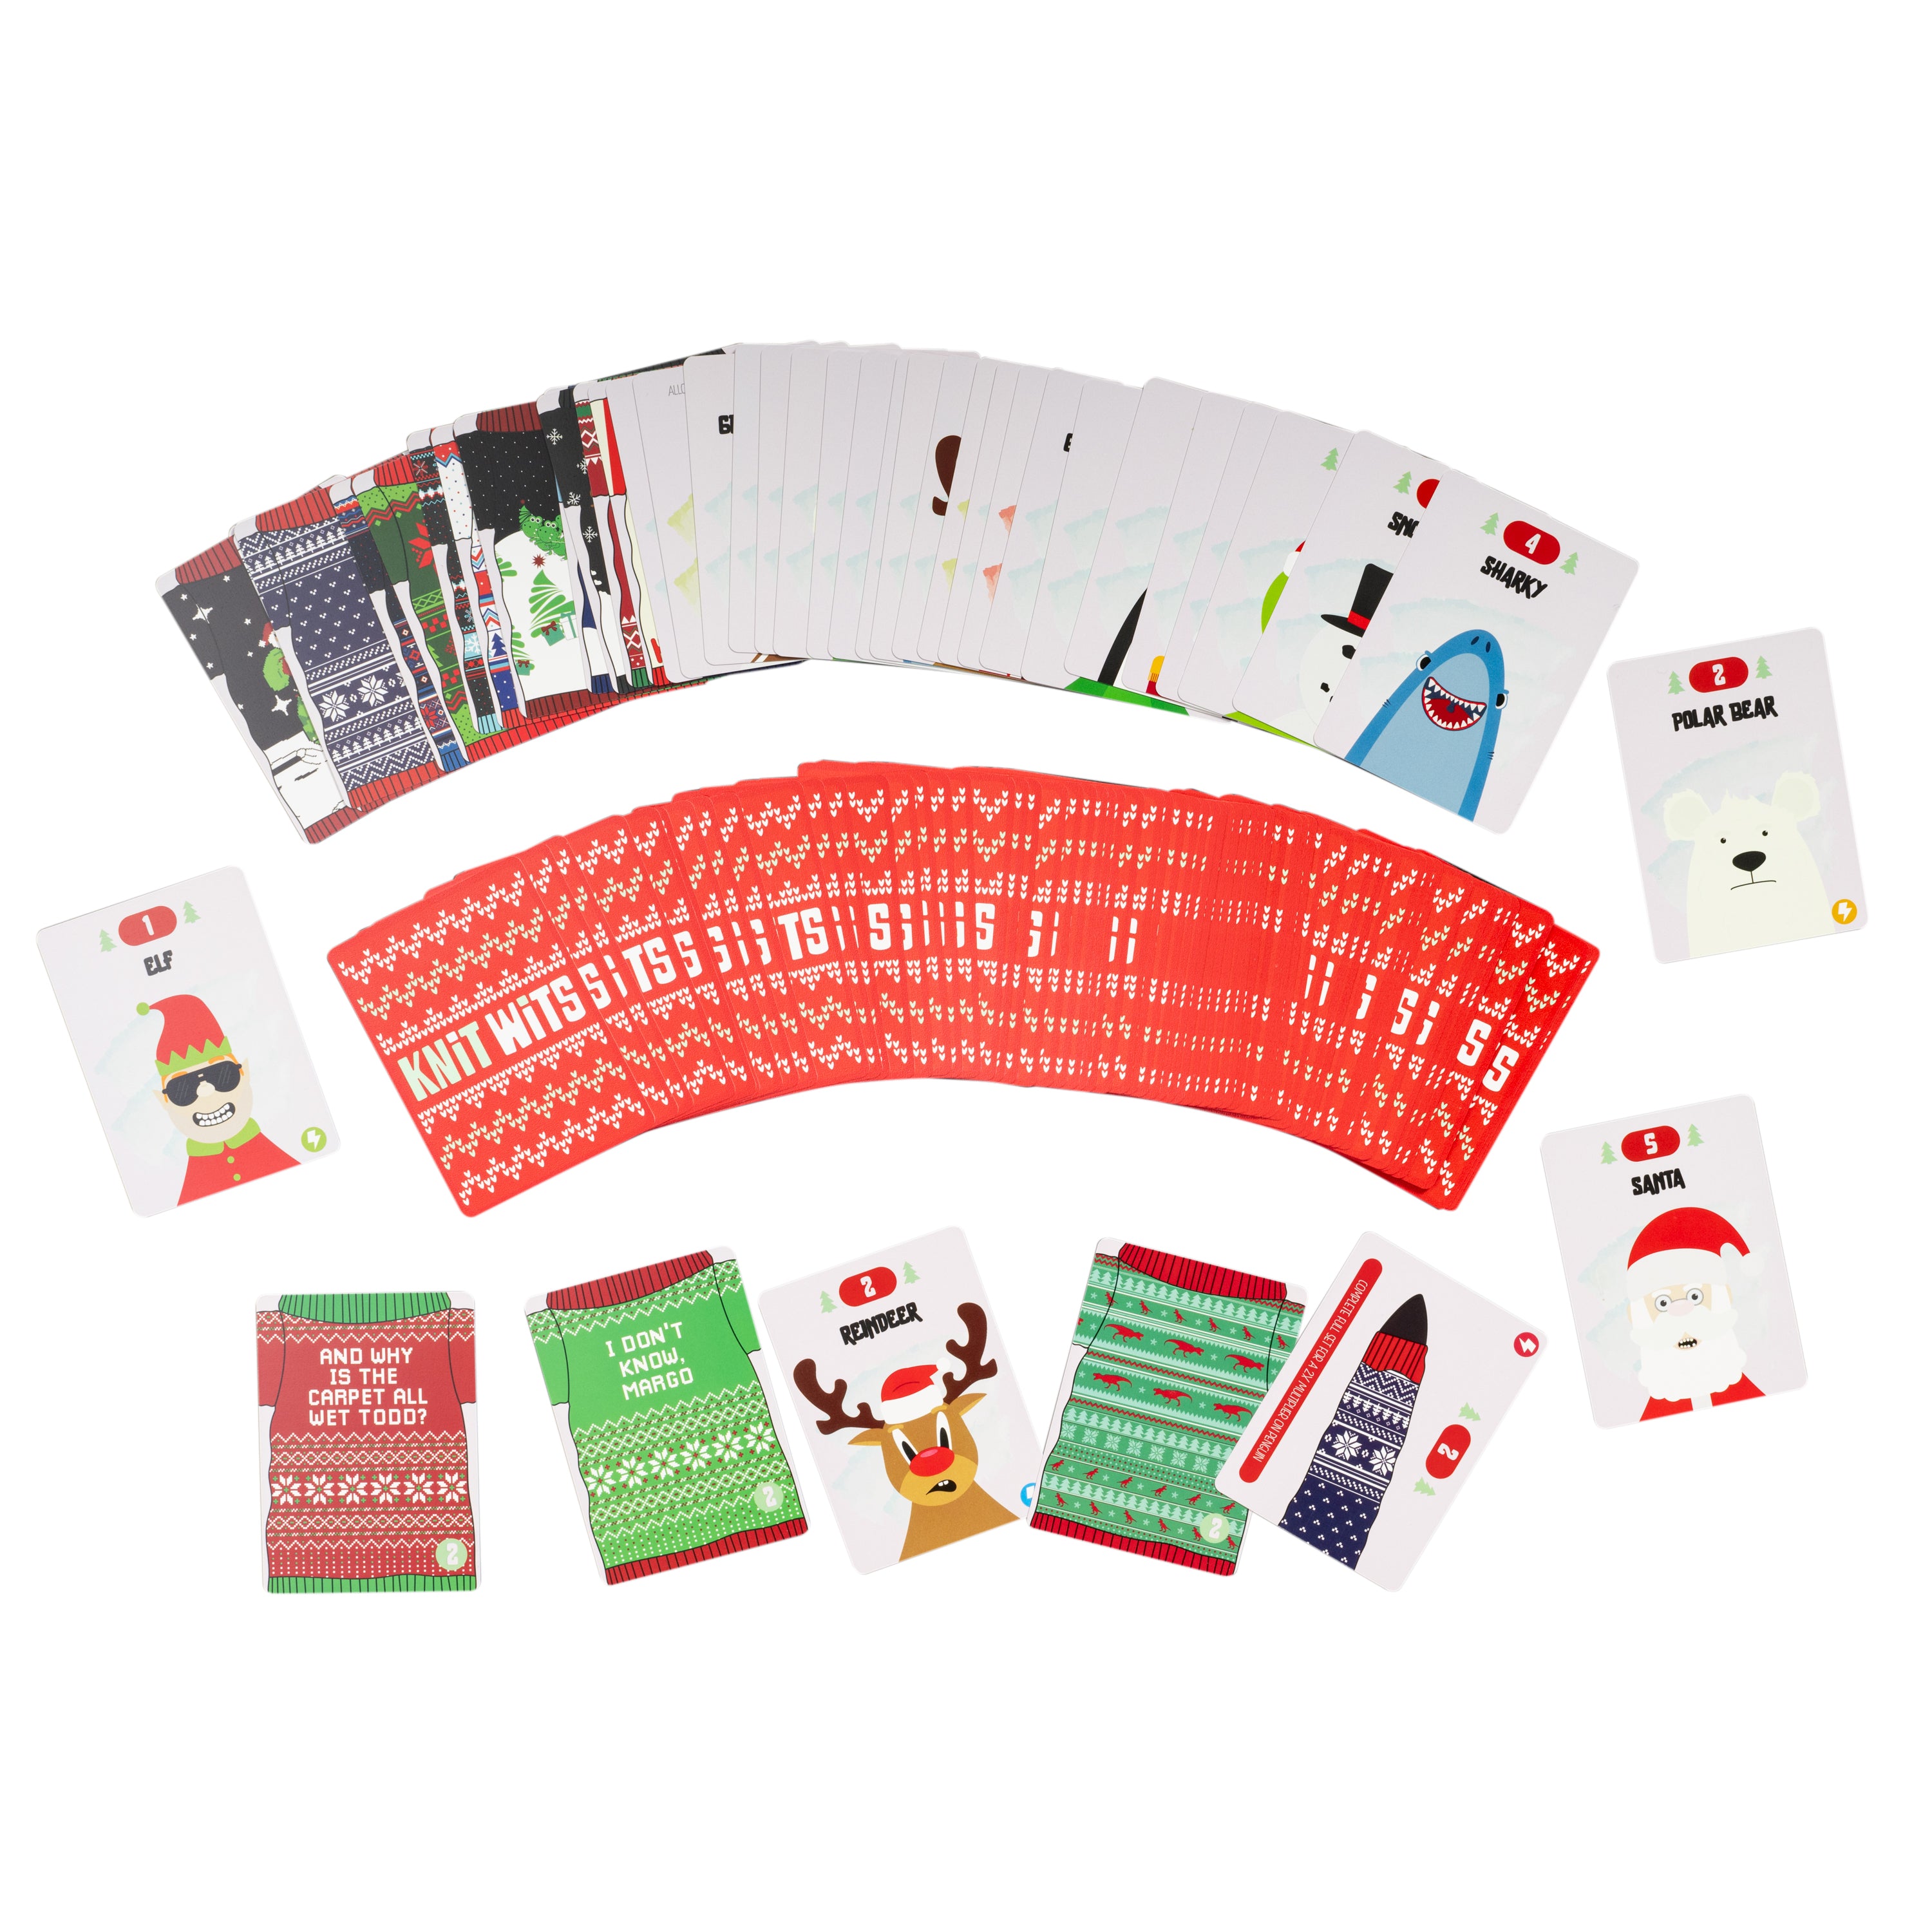 Knit Wits the Card Game